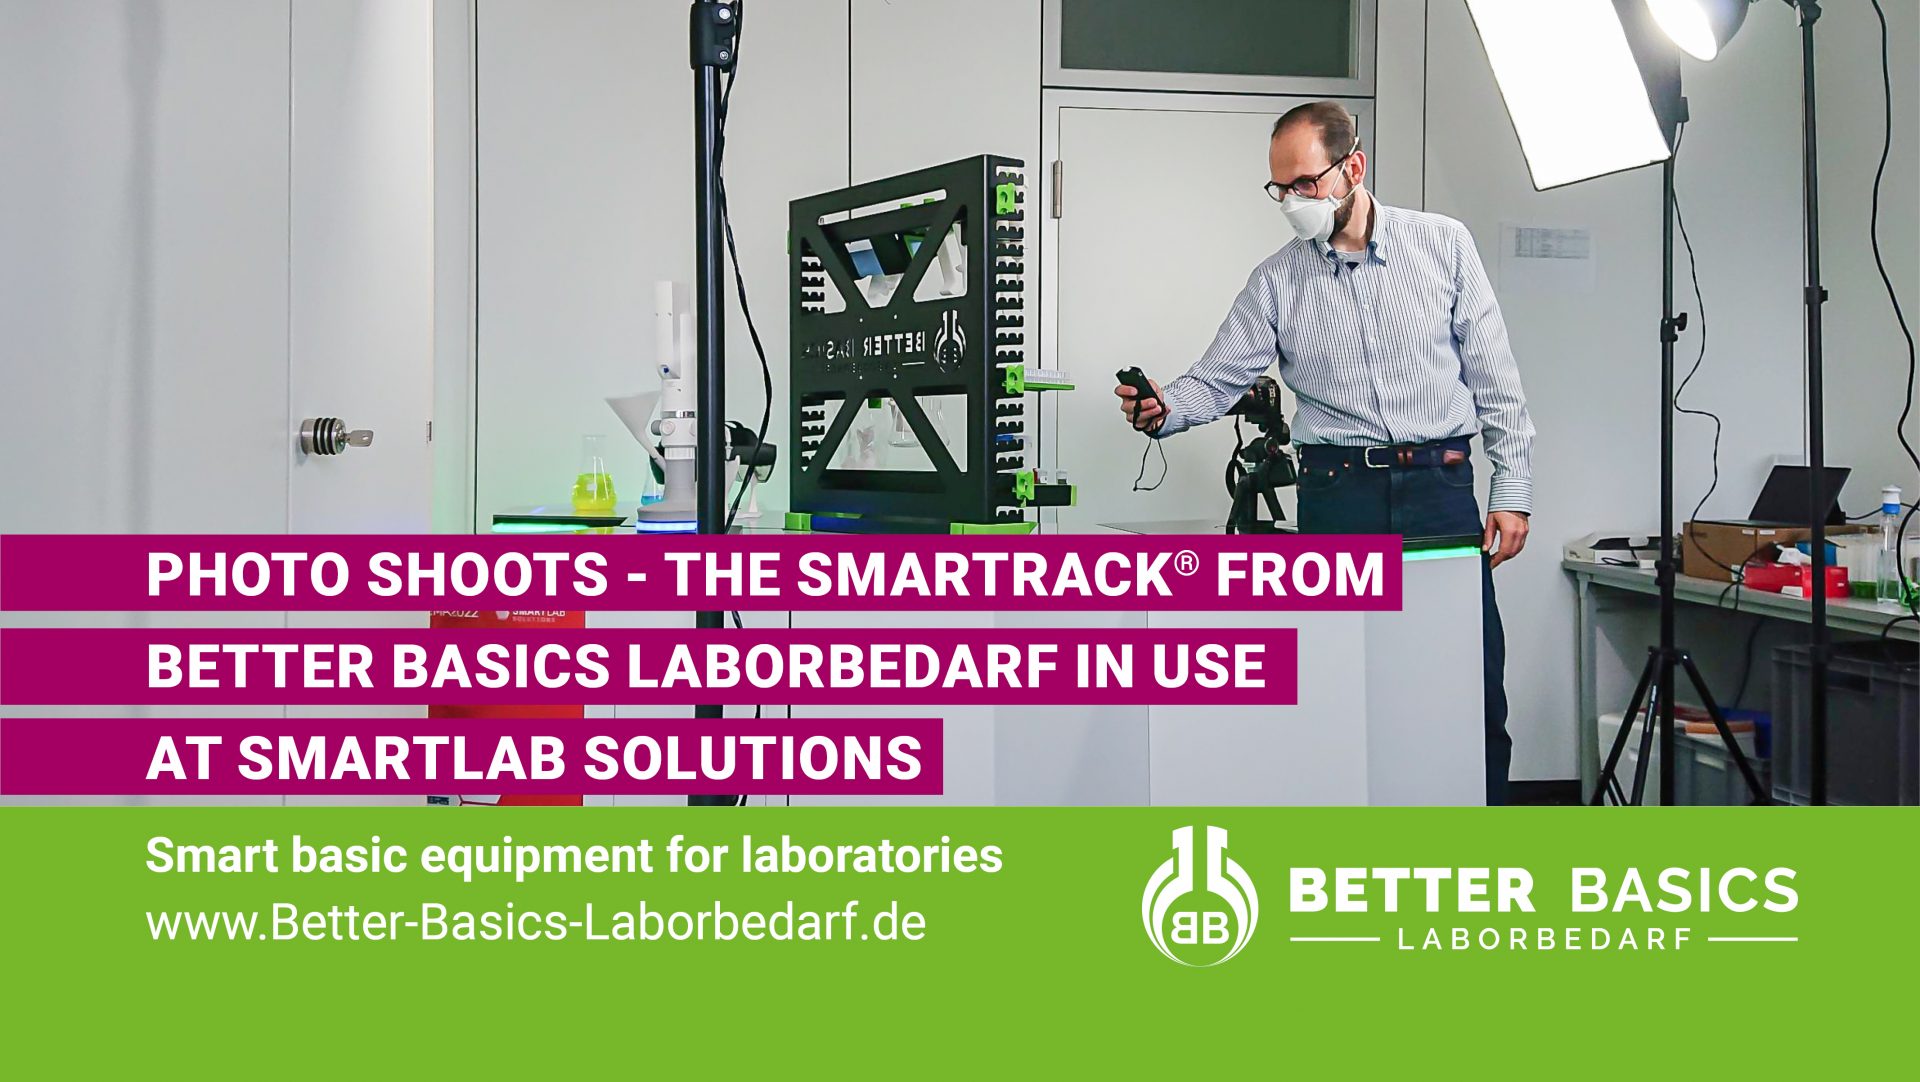 On 27 September 2022, a series of photographs were taken at the offices of SmartLab Solutions GmbH. The SmartRack from Better Basics Laborbedarf GmbH is in use on the iHex honeycombs.